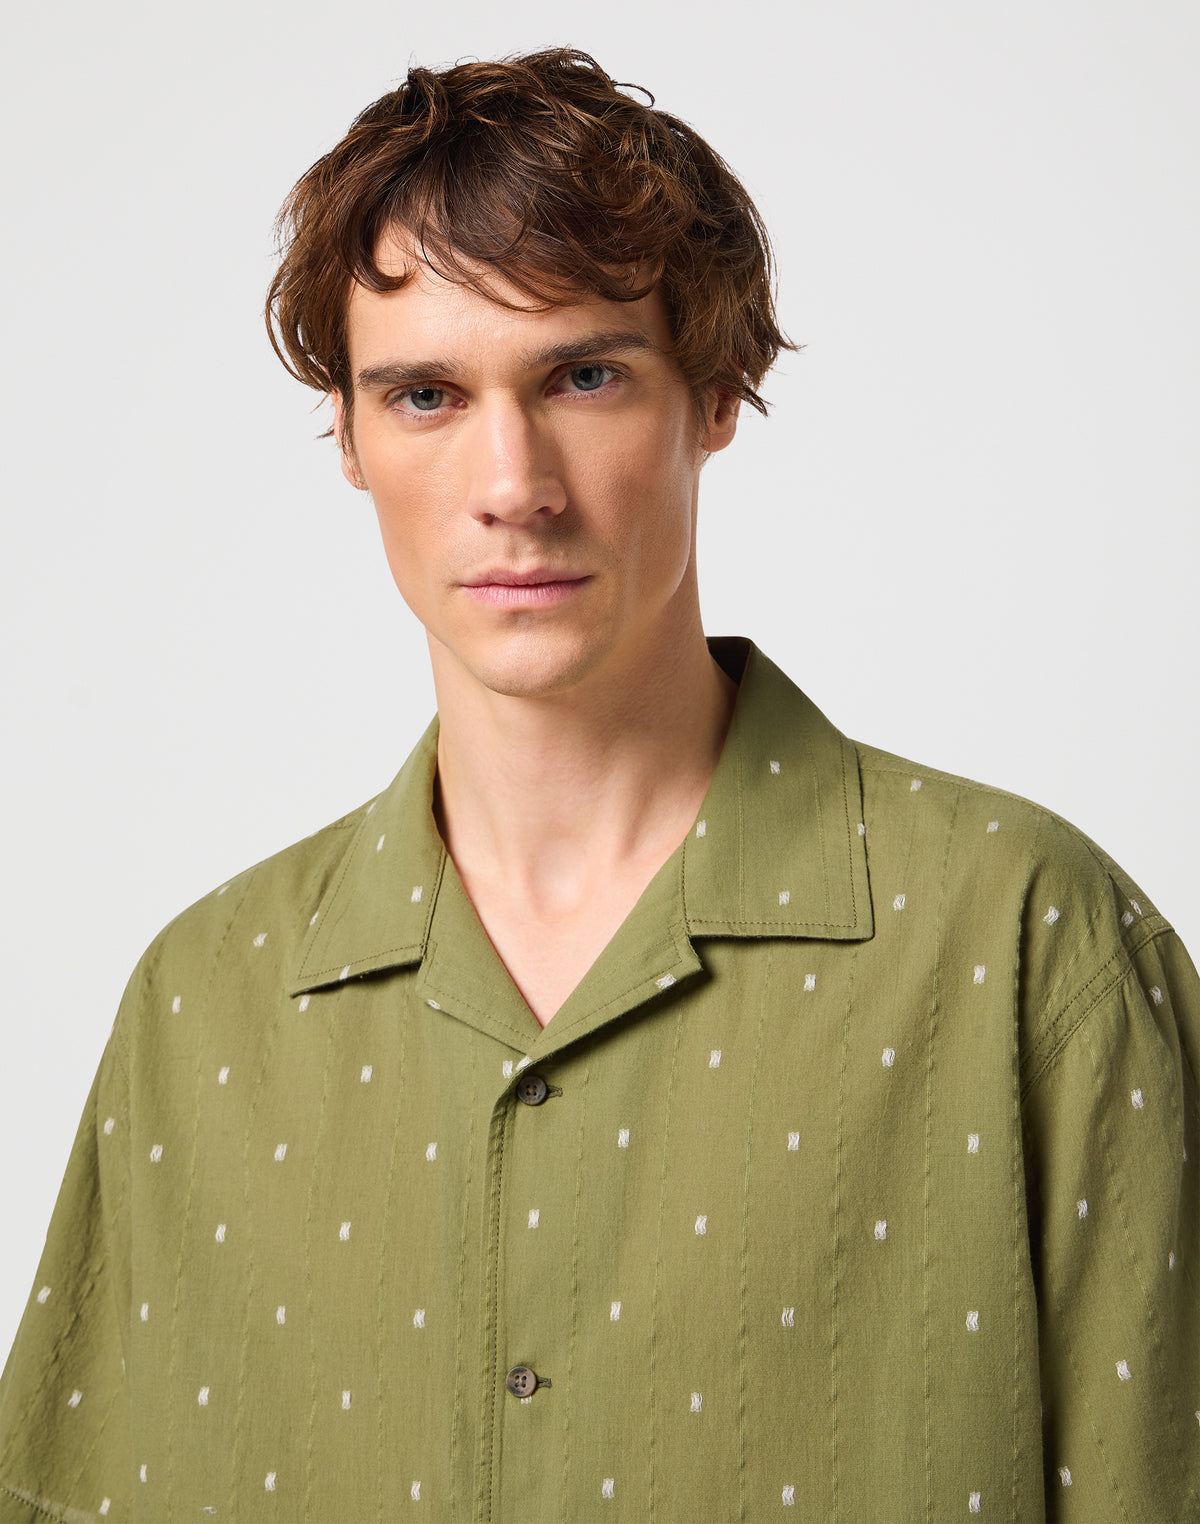 Resort Shirt in Dusty Olive